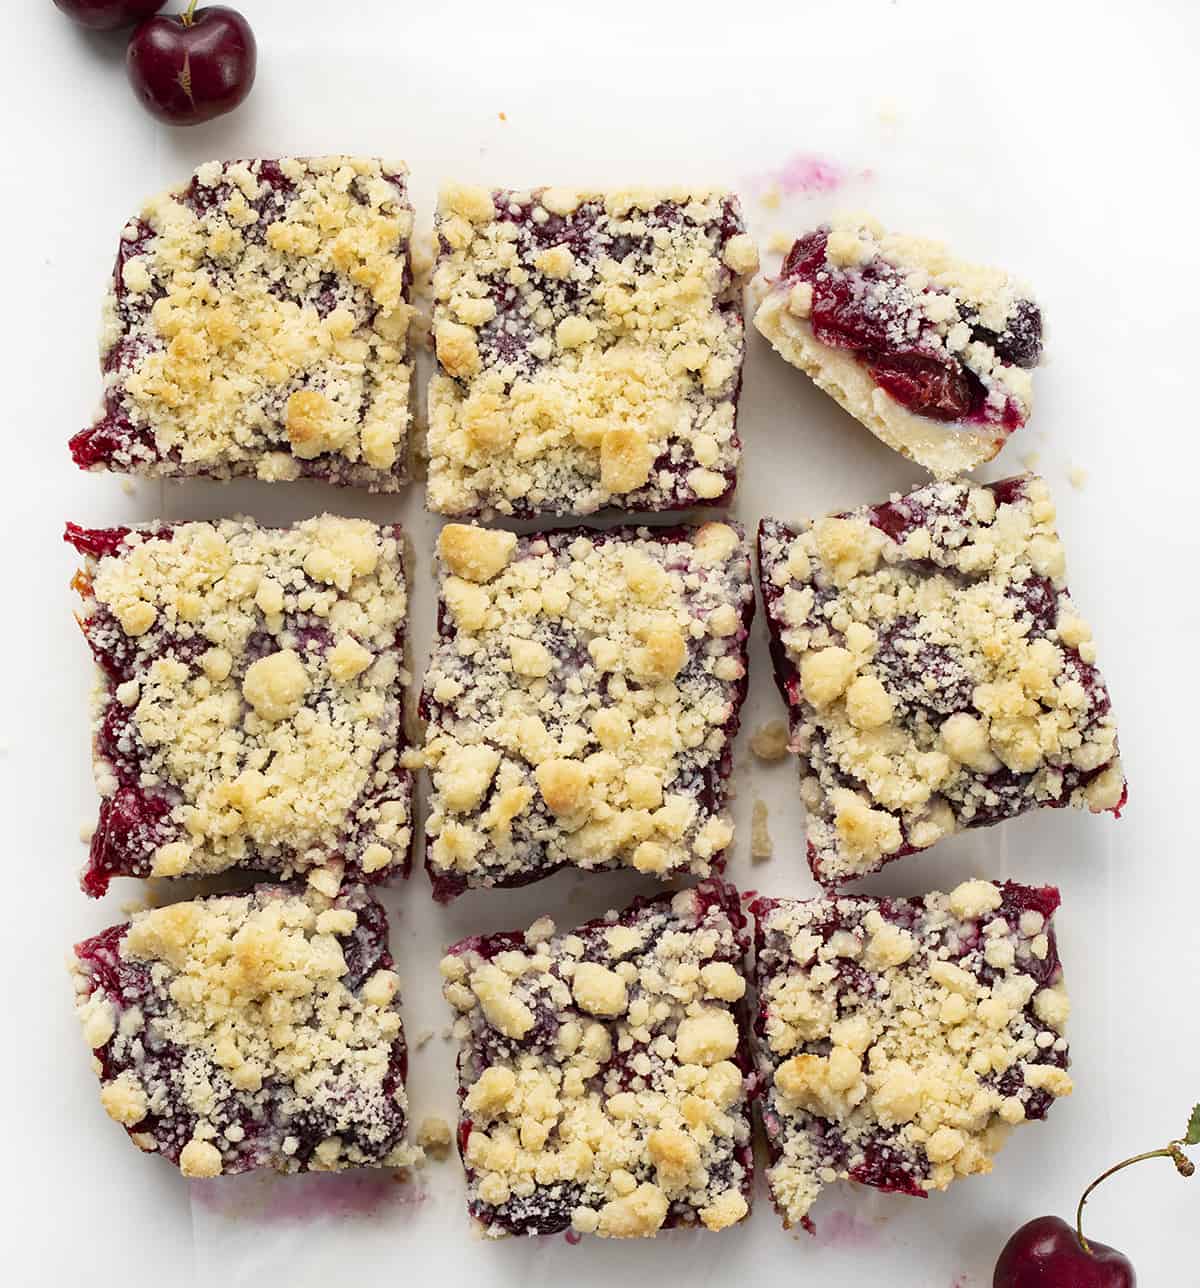 Overhead Image of Cut Up Cherry Pie Bars with One on Its Side. Dessert, Baking, Bars, Cherry Bars, Cherry Pie Bars, Homemade Cherry Pie Filling, Easy Bars, Real Cherry Desserts, Summer Baking, Winter Baking, Christmas Recipes, i am baker, iambaker.